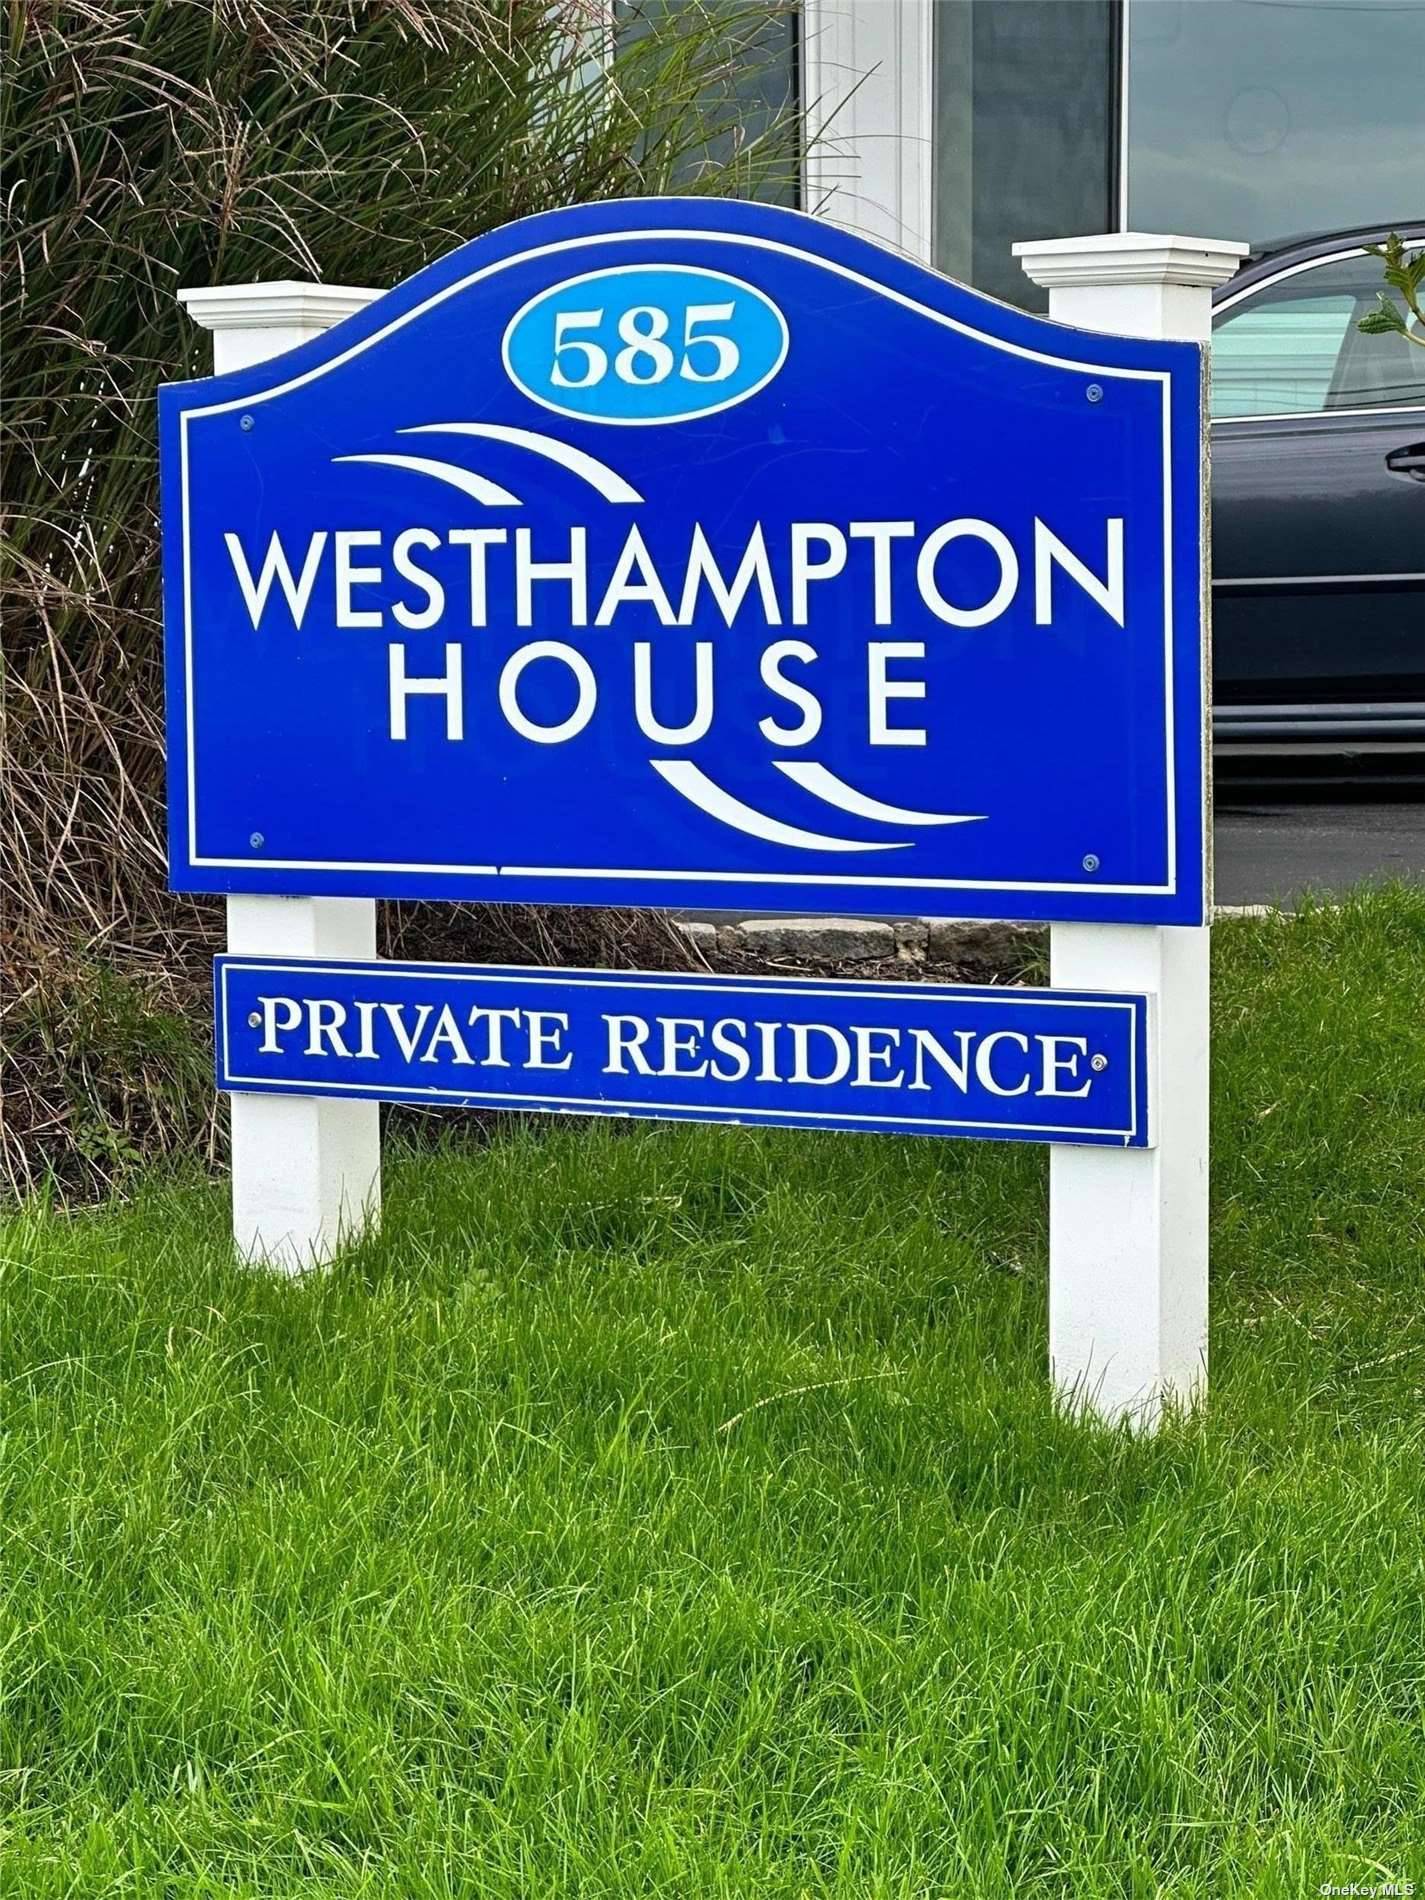 Welcome to Westhampton House a lovely co operative complex on the ocean side of Dune Rd with access to the bay as well.